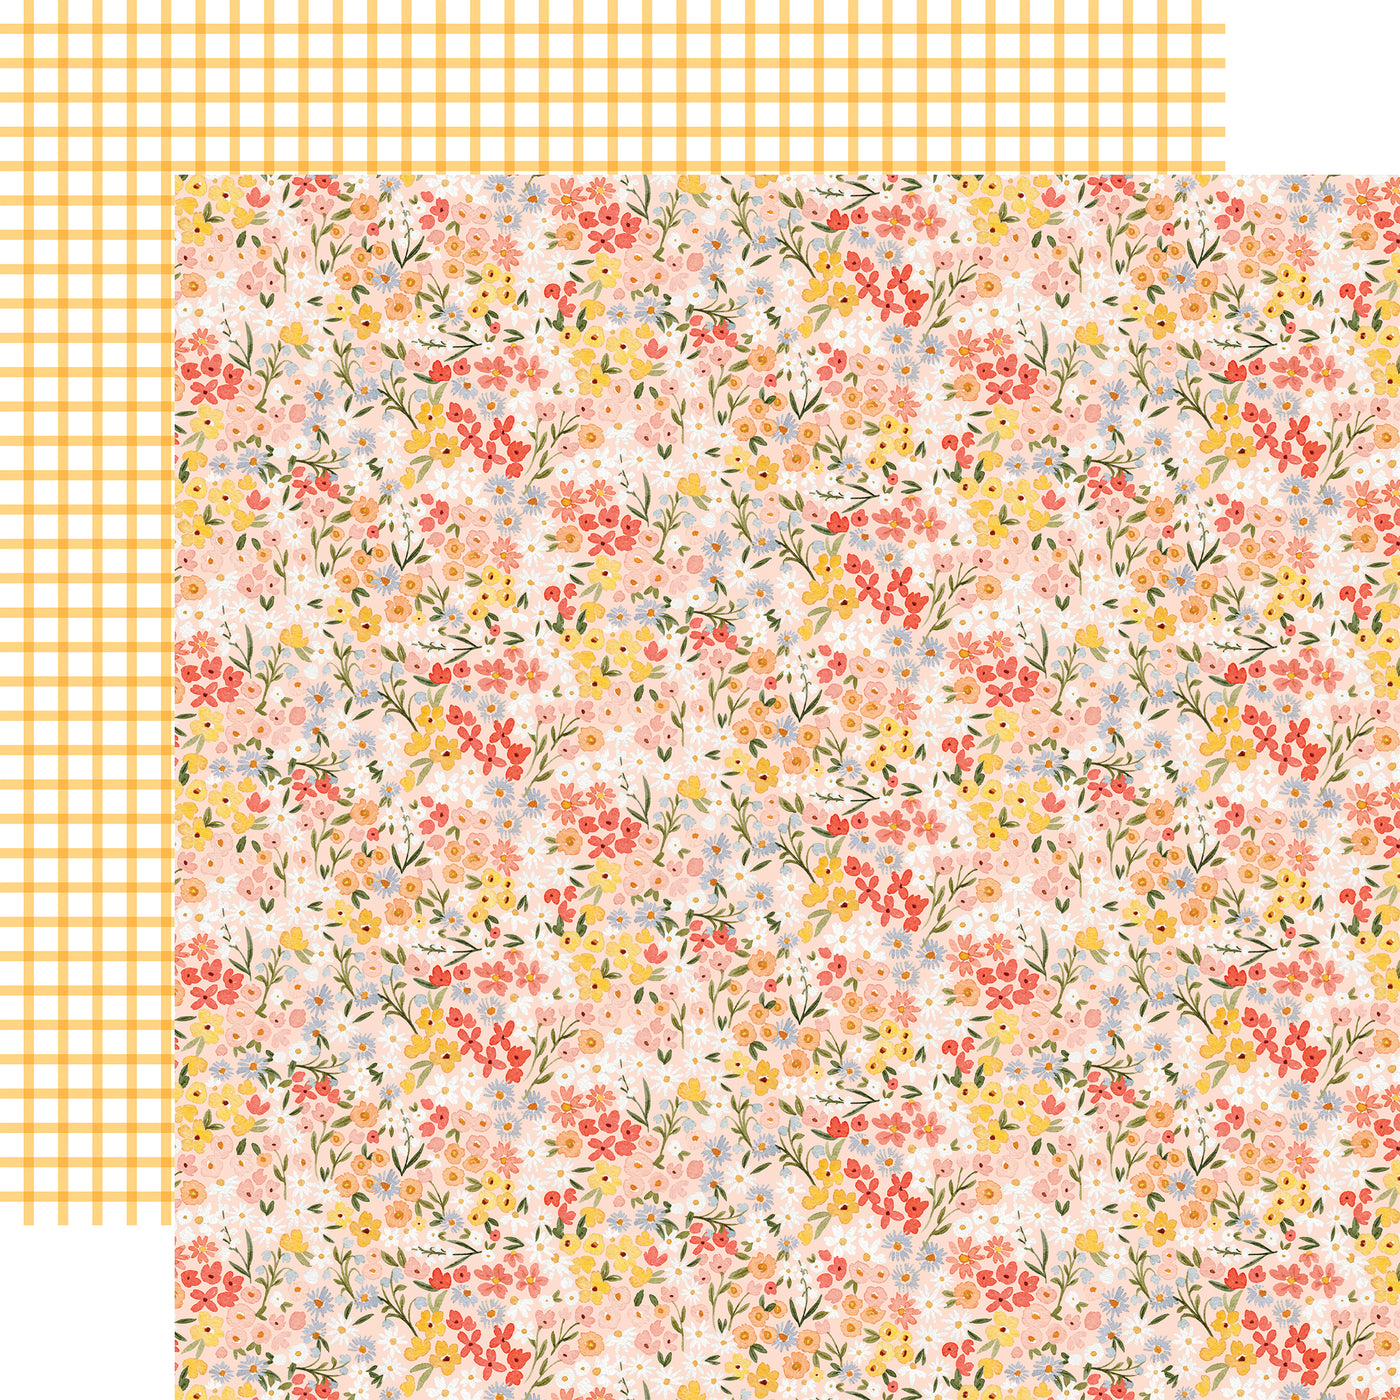  The front side of this paper has a beautiful small floral pattern in shades of pink, maroon, yellow, and periwinkle. The reverse side is a yellow grid pattern. 